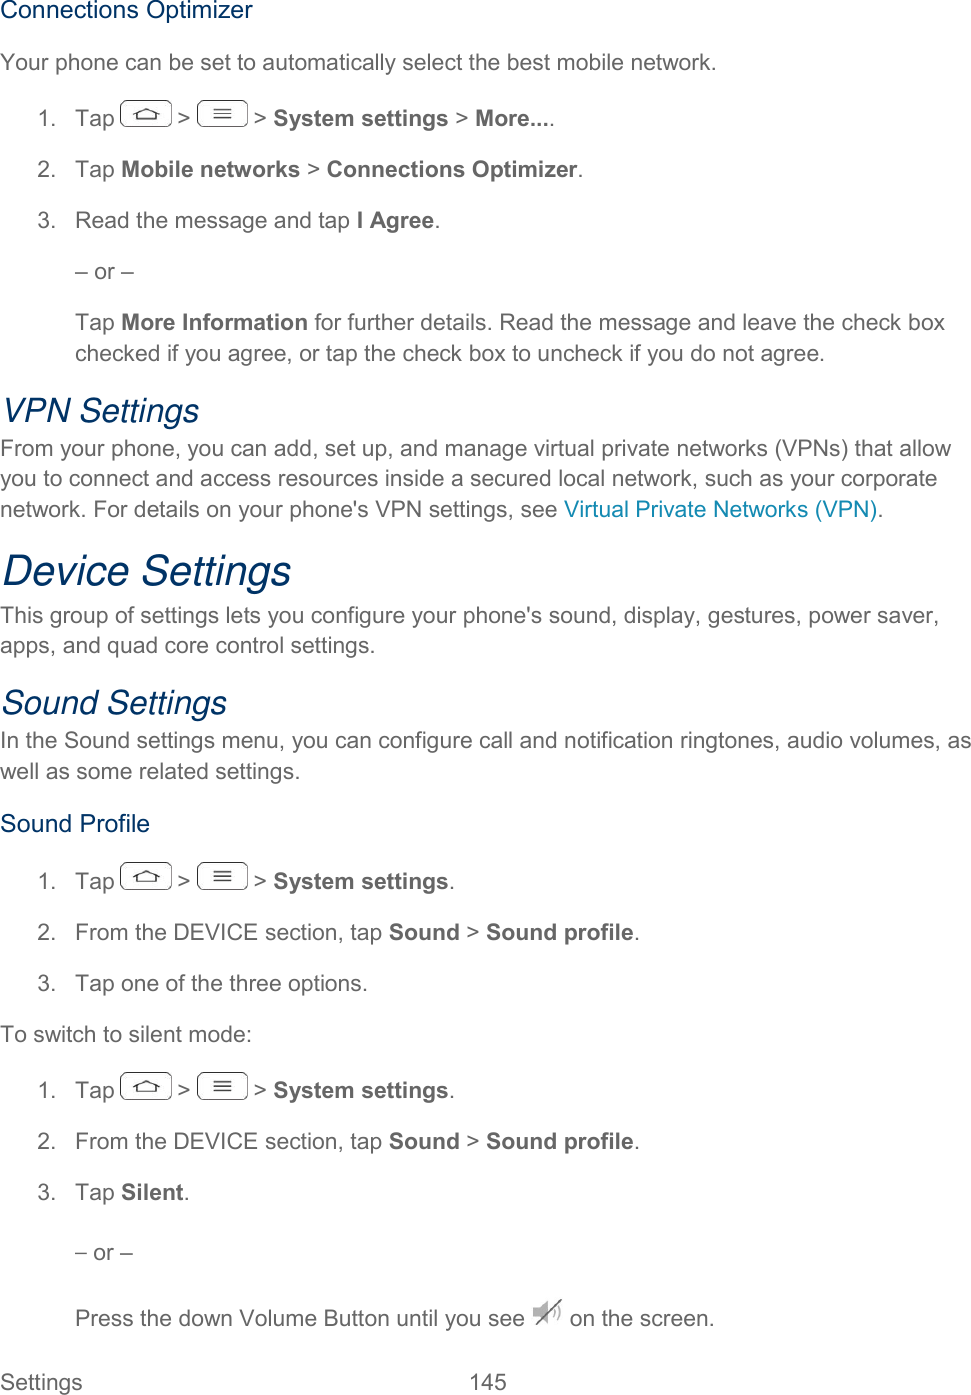  Settings  145   Connections Optimizer Your phone can be set to automatically select the best mobile network.  1.  Tap   &gt;   &gt; System settings &gt; More.... 2.  Tap Mobile networks &gt; Connections Optimizer.  3.  Read the message and tap I Agree.  – or –  Tap More Information for further details. Read the message and leave the check box checked if you agree, or tap the check box to uncheck if you do not agree. VPN Settings From your phone, you can add, set up, and manage virtual private networks (VPNs) that allow you to connect and access resources inside a secured local network, such as your corporate network. For details on your phone&apos;s VPN settings, see Virtual Private Networks (VPN). Device Settings This group of settings lets you configure your phone&apos;s sound, display, gestures, power saver, apps, and quad core control settings. Sound Settings In the Sound settings menu, you can configure call and notification ringtones, audio volumes, as well as some related settings. Sound Profile 1.  Tap   &gt;   &gt; System settings. 2.  From the DEVICE section, tap Sound &gt; Sound profile. 3.  Tap one of the three options. To switch to silent mode: 1.  Tap   &gt;   &gt; System settings. 2.  From the DEVICE section, tap Sound &gt; Sound profile. 3.  Tap Silent. – or – Press the down Volume Button until you see   on the screen. 